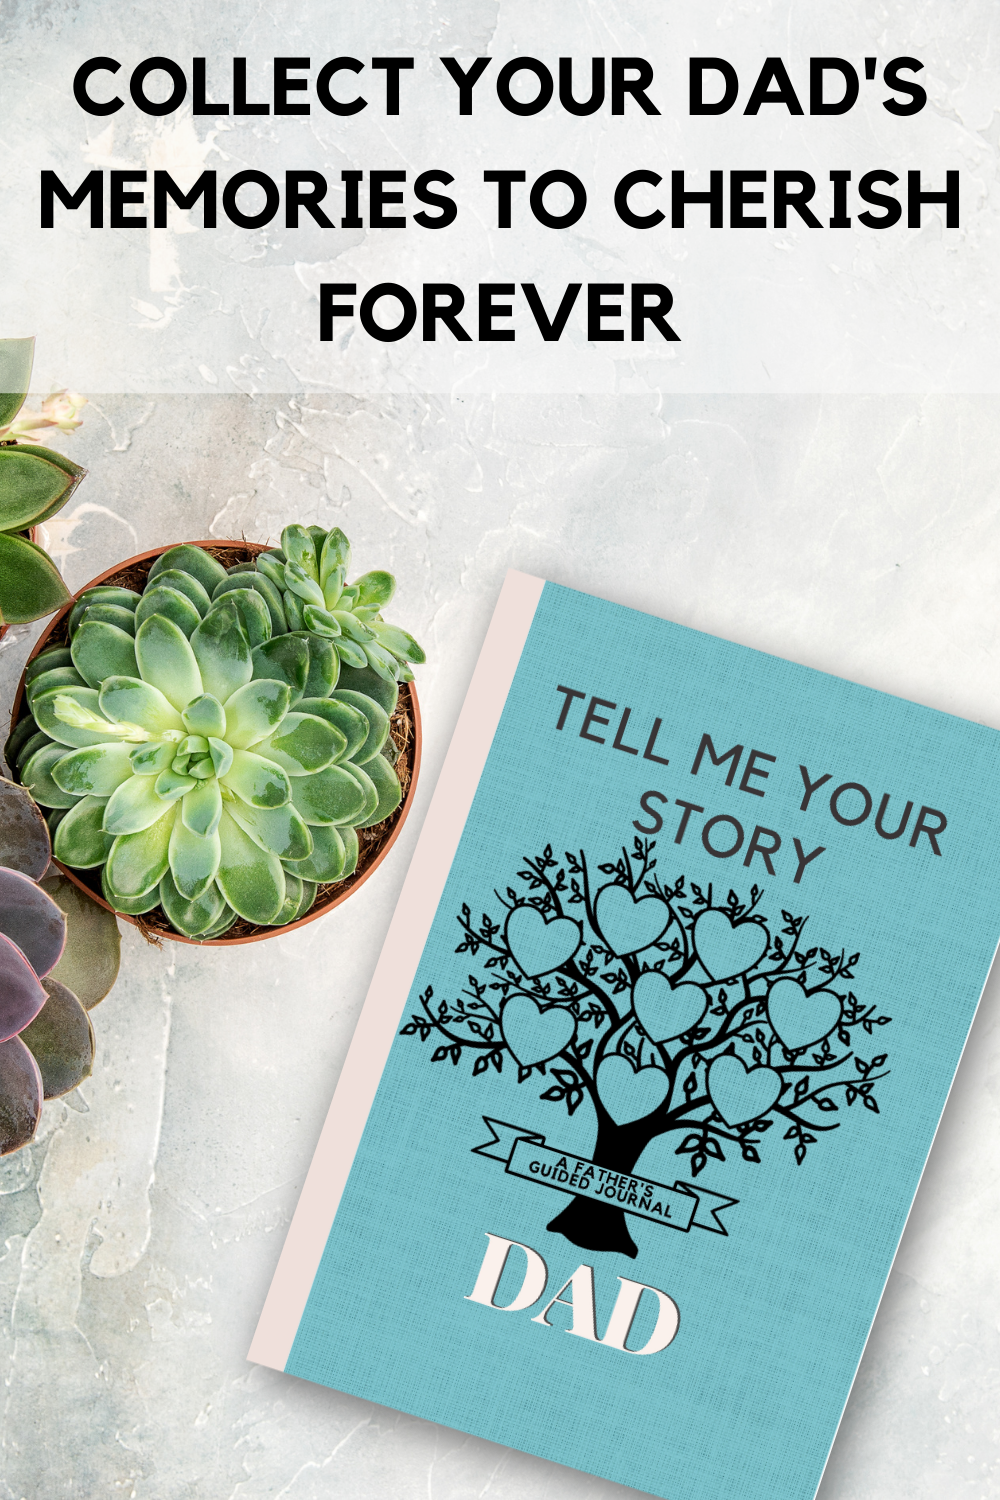 Collect your dad's memories to cherish forever text with dad tell me your story on light background